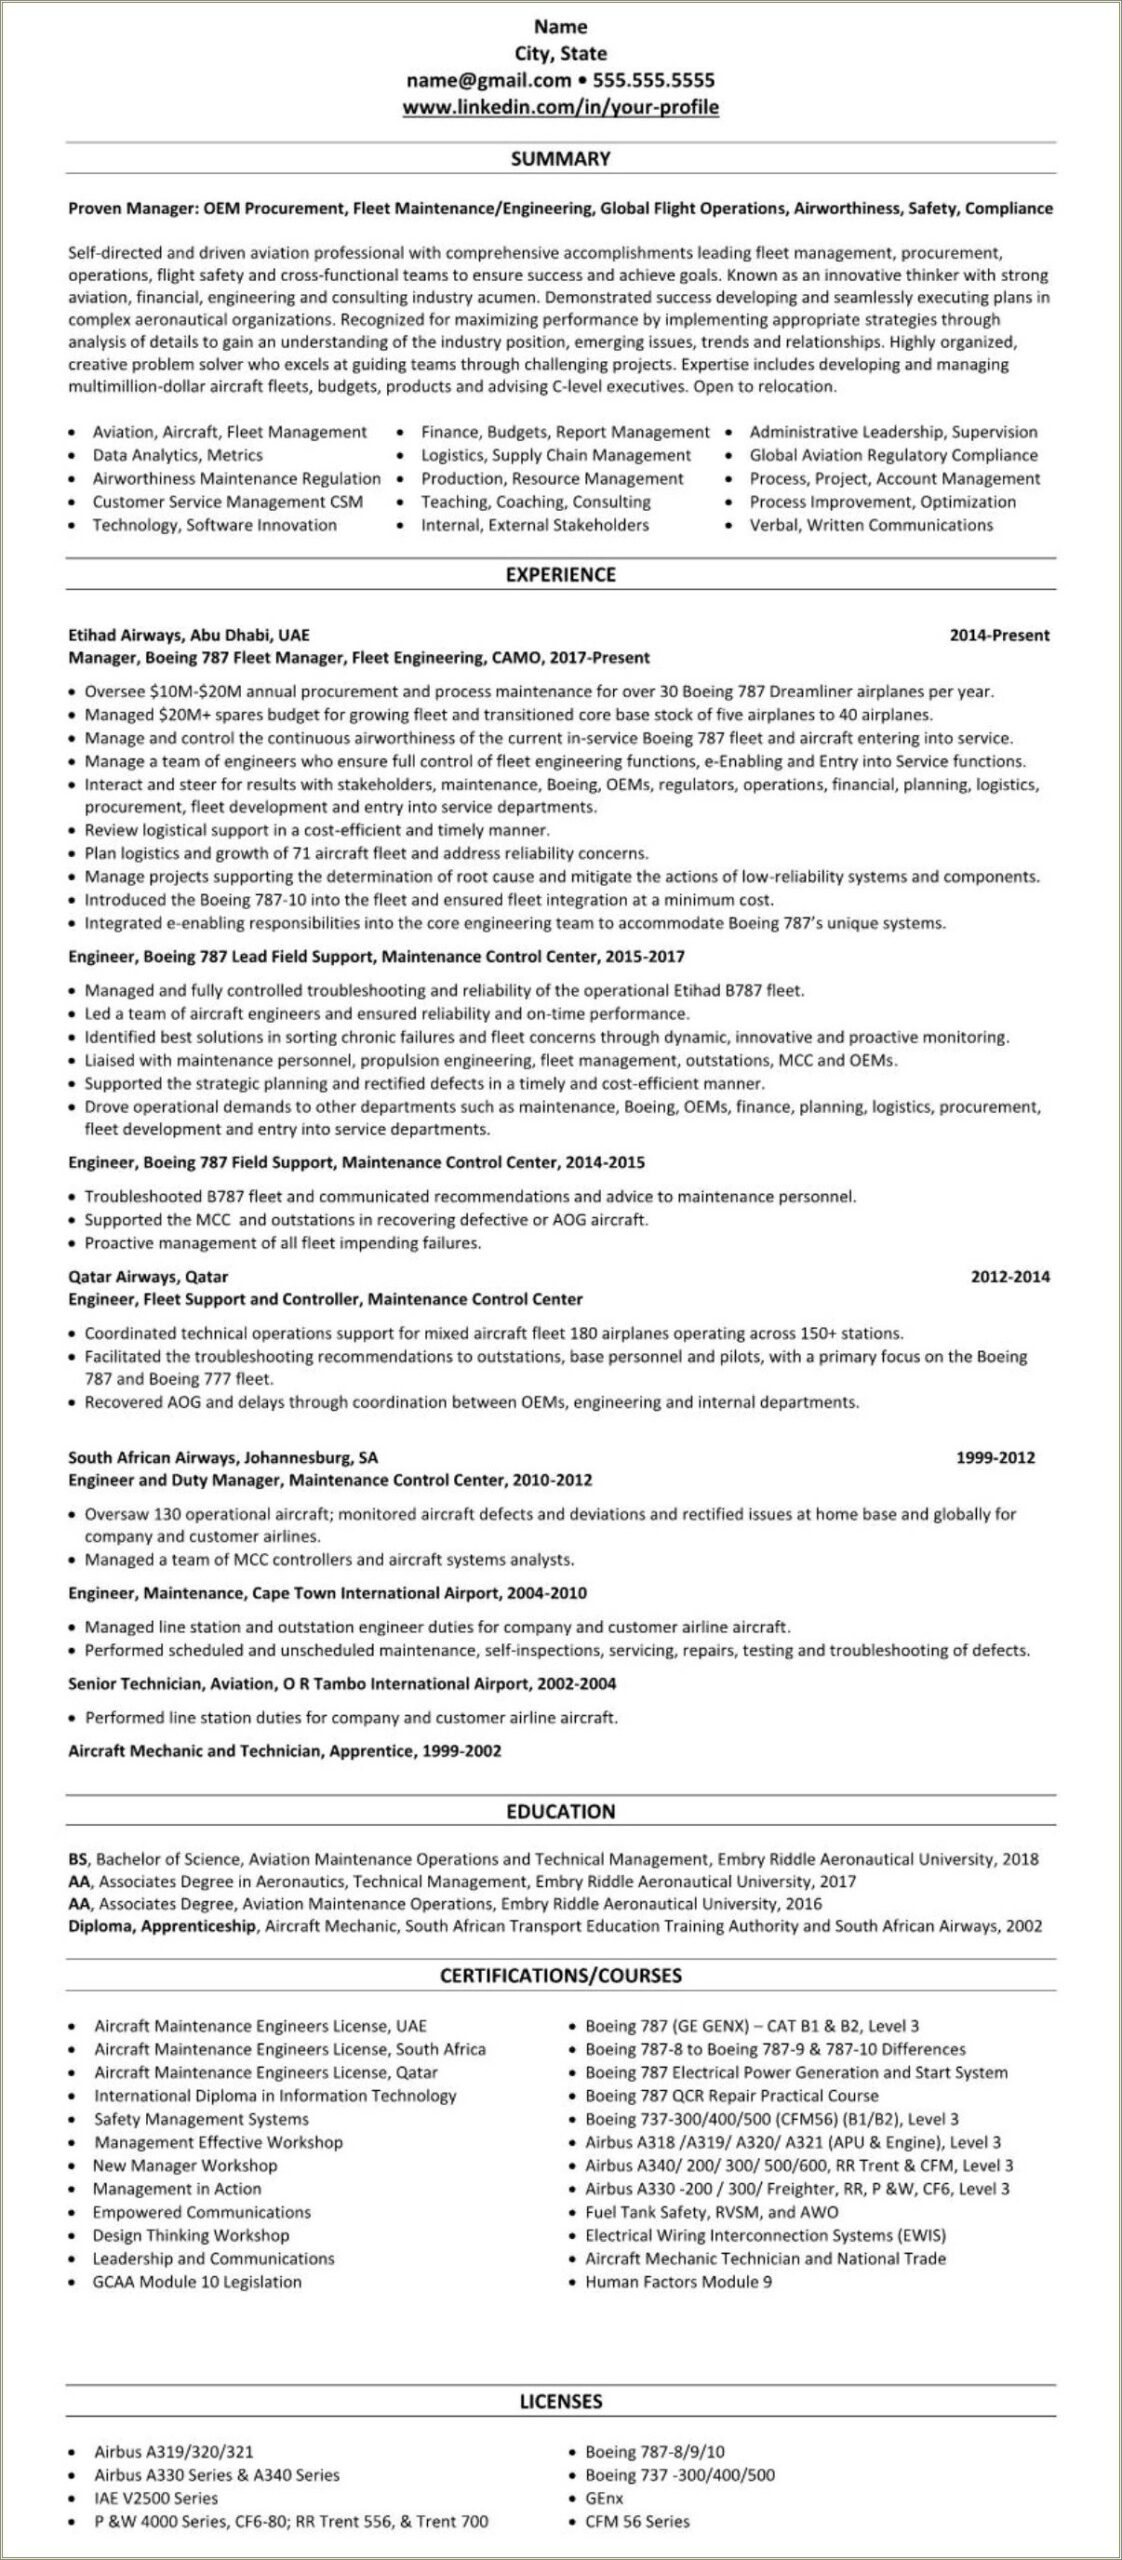 Resume Template Sample For Aviation Engineer